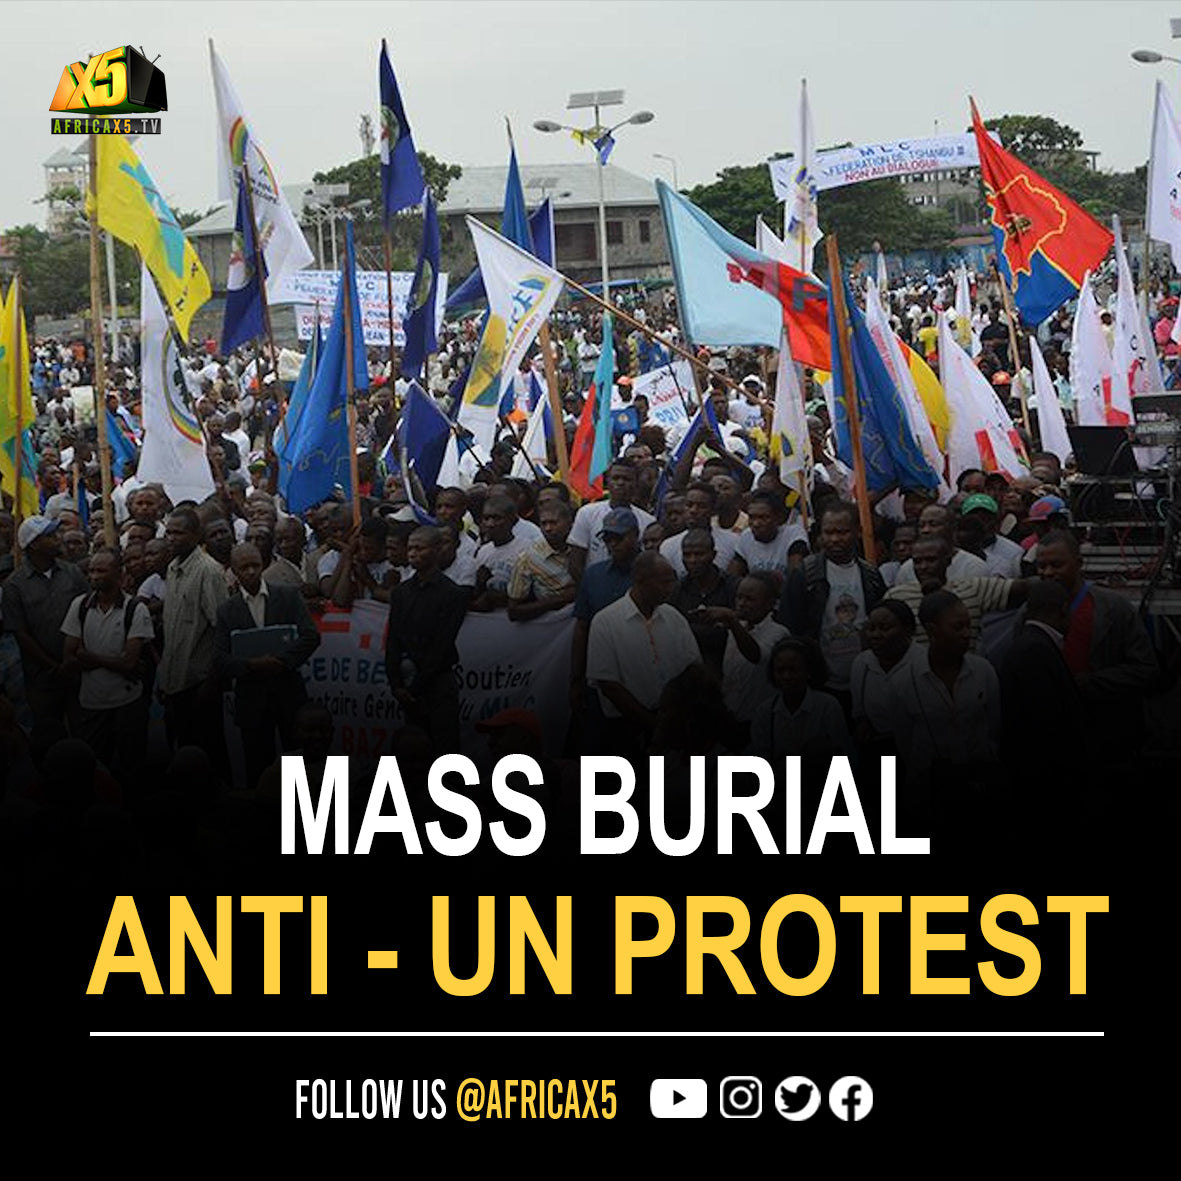 Mass burial for Congolese killed at anti-UN protest